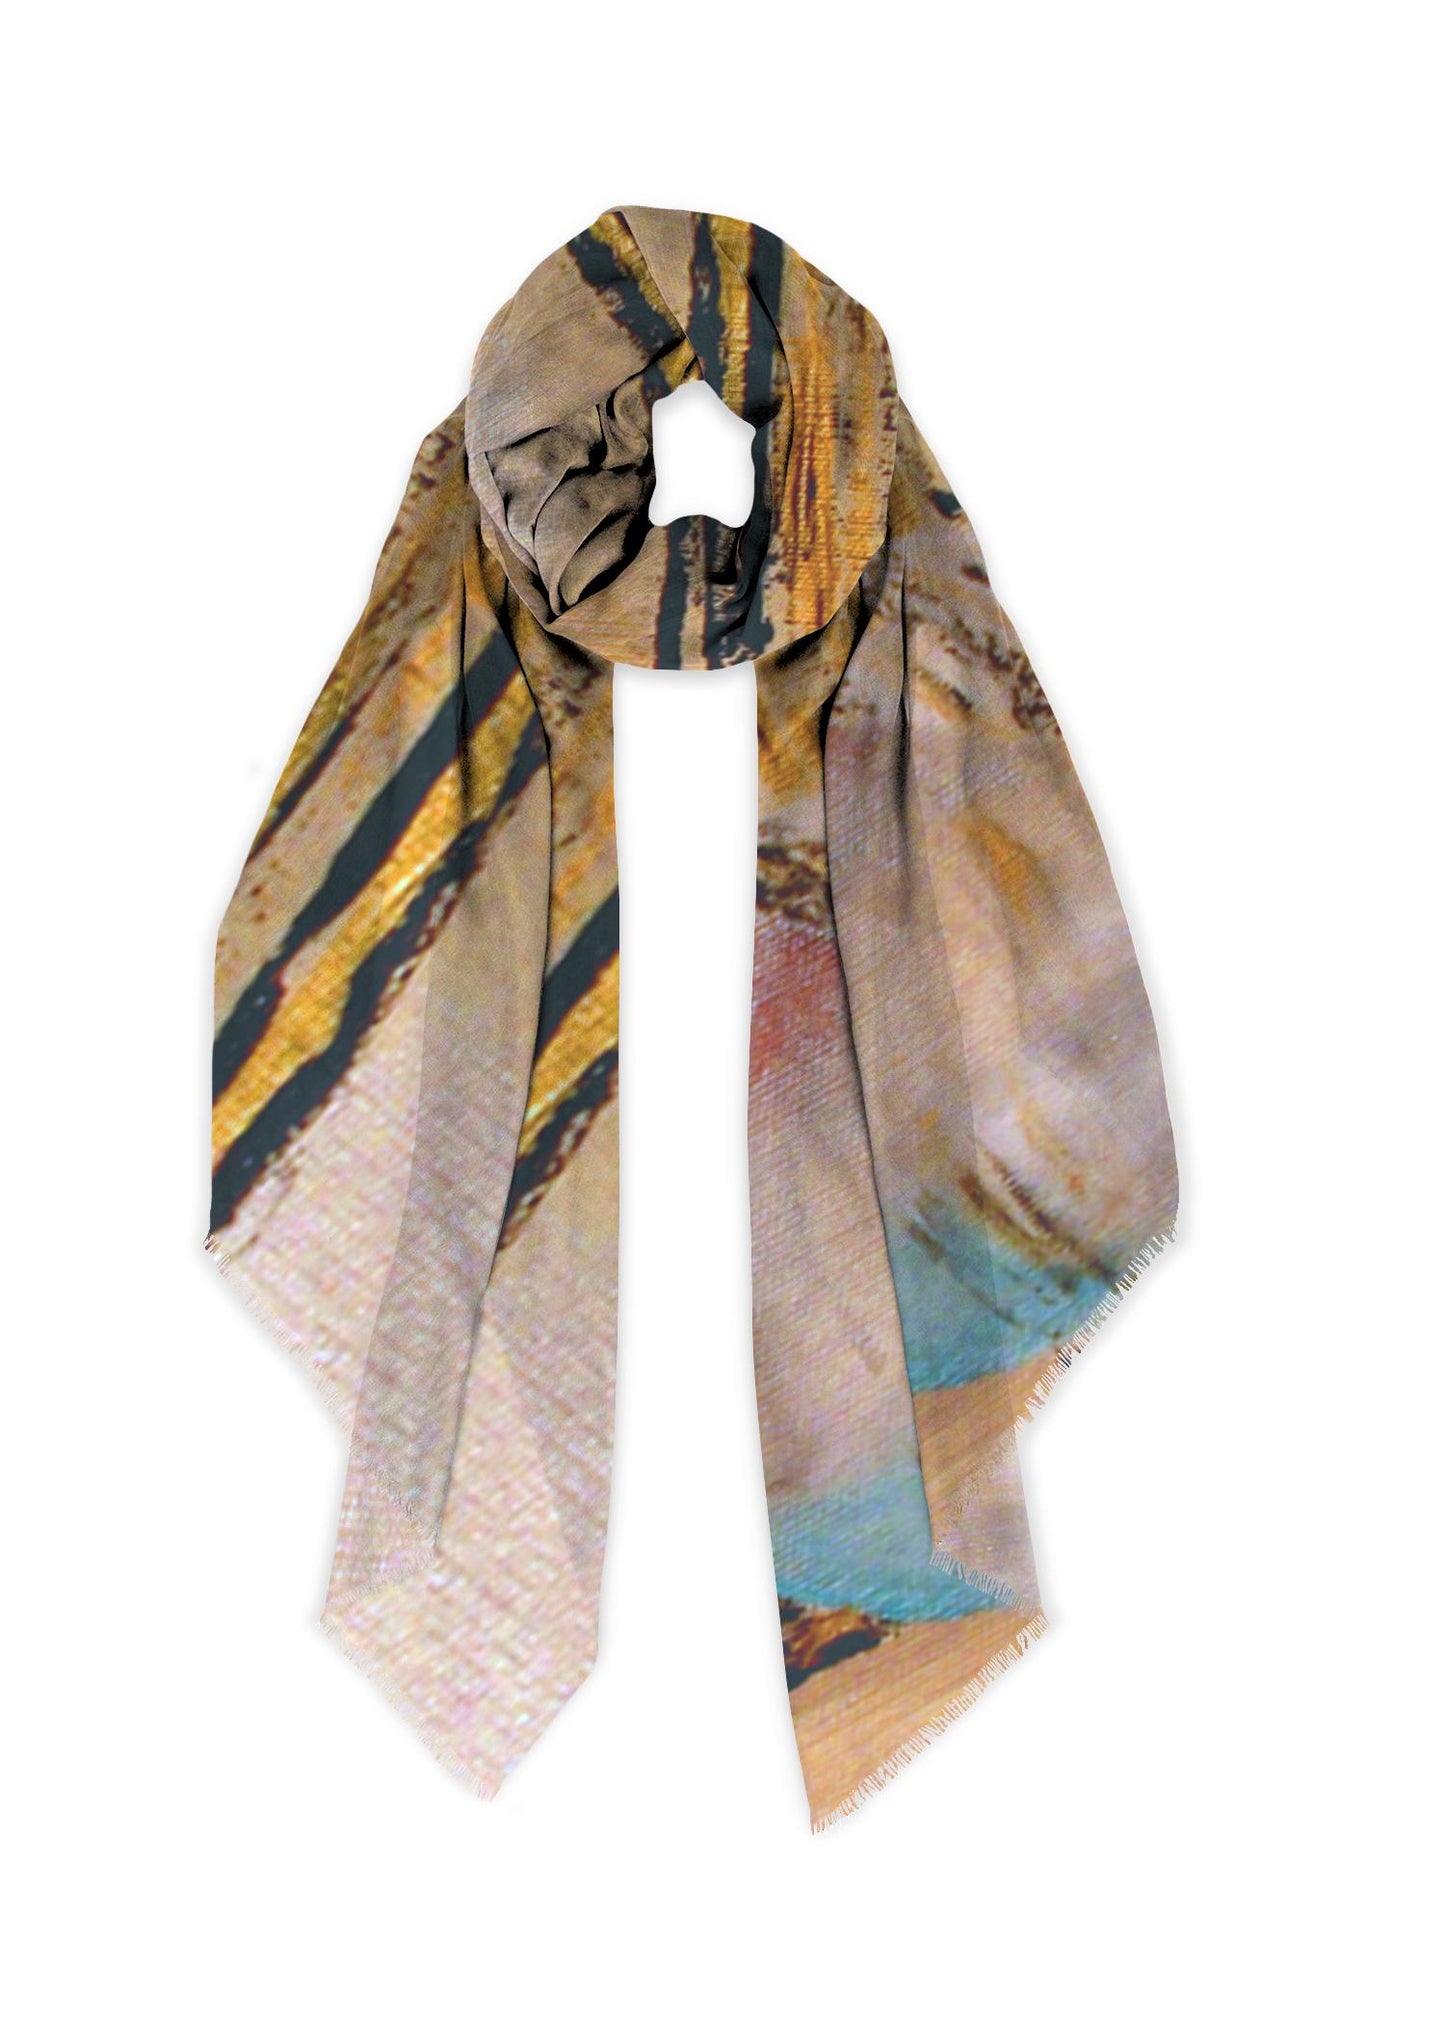 Luxury botanical silk scarf light weight wrap Plus size cover up year round comfort resort wear direct from exclusive Designer Looking for some Zen?  This oriental design of neutral colors is  soft place to land.